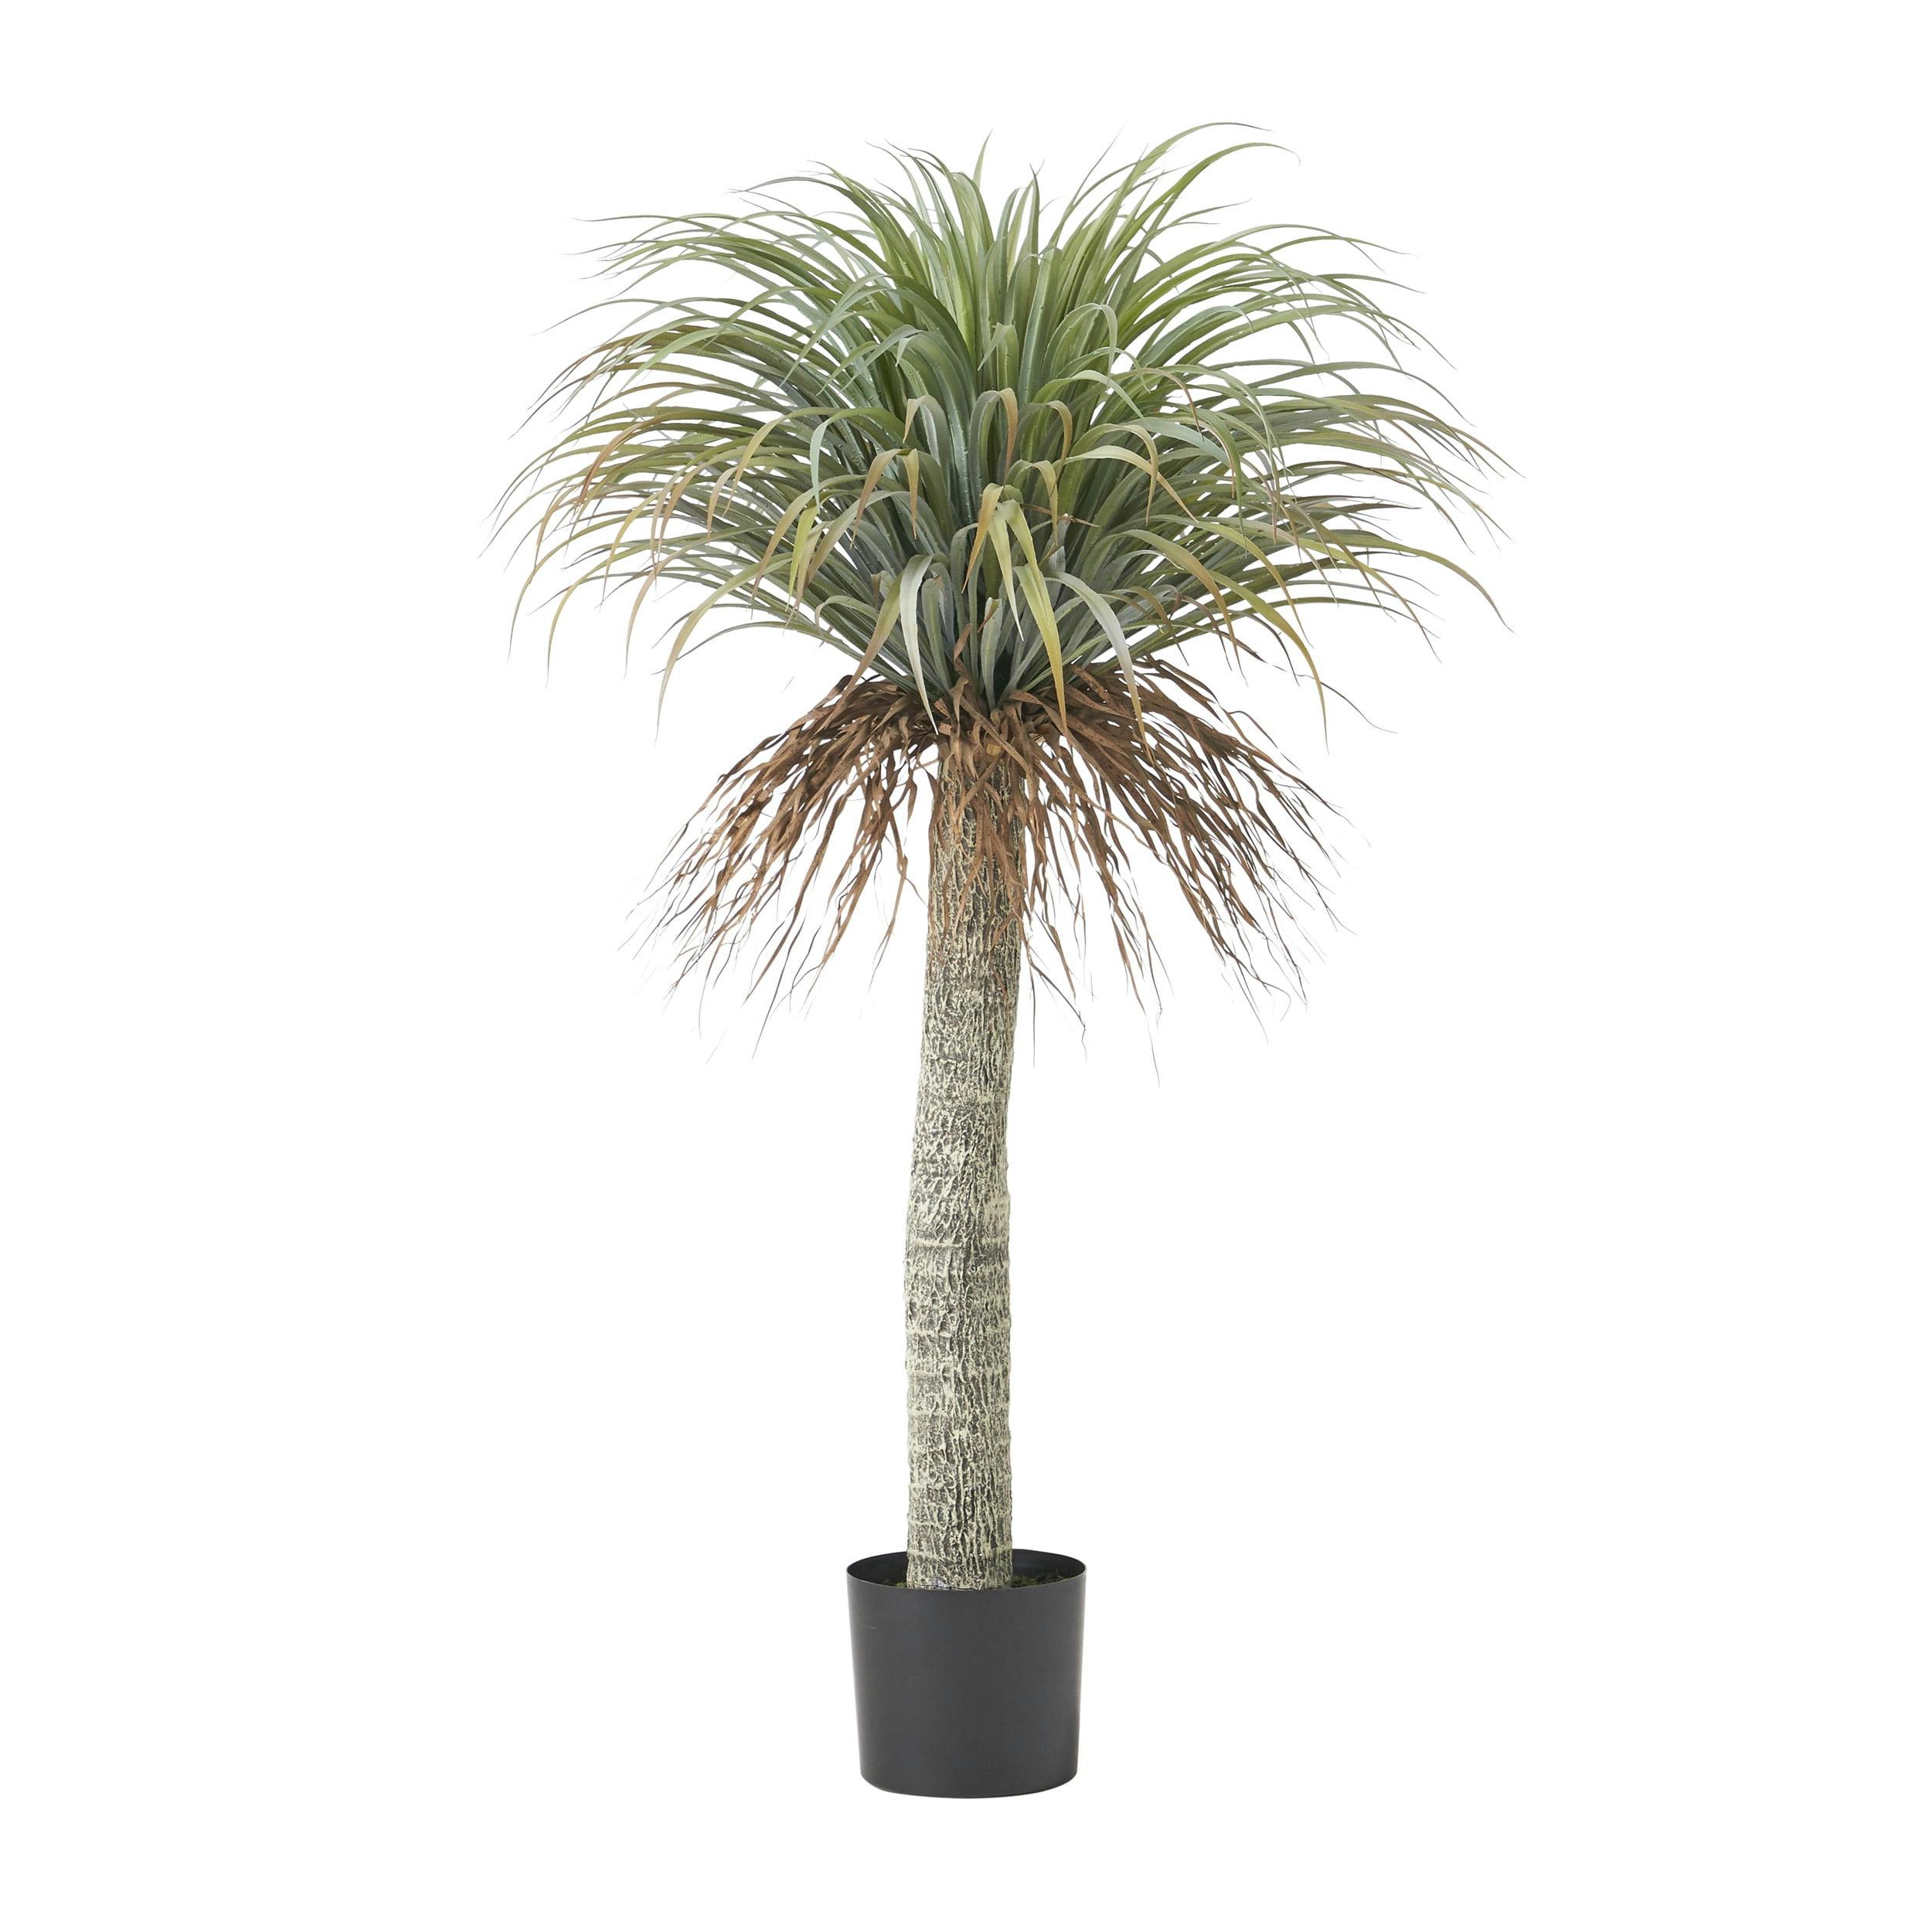 Lifelike Green Yucca Artificial Plant in Pre-Potted Design